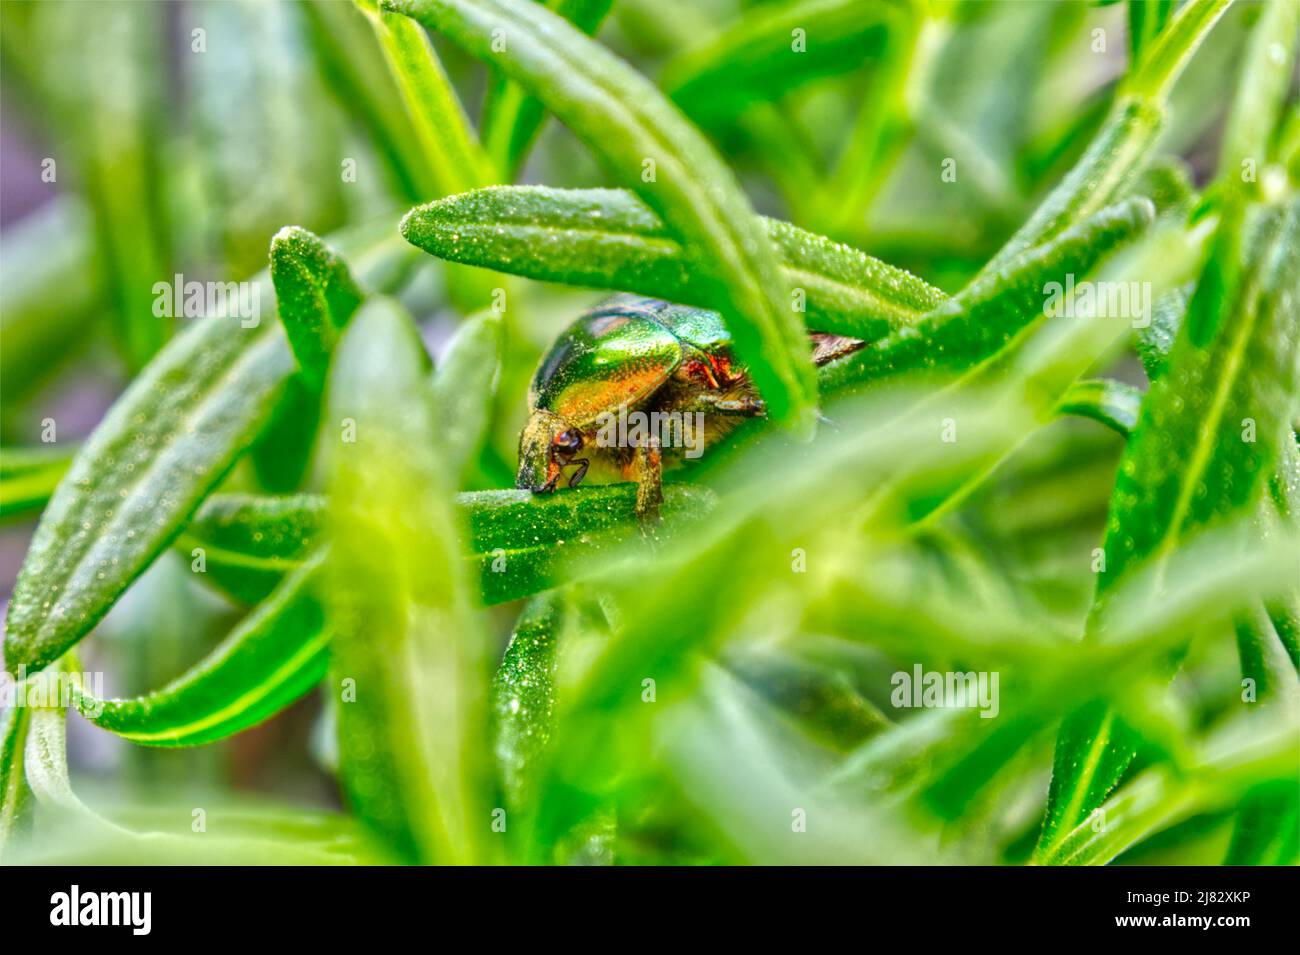 Golden tadpole beetle (Cetonia aurata) in green grass with lavender leaves Stock Photo